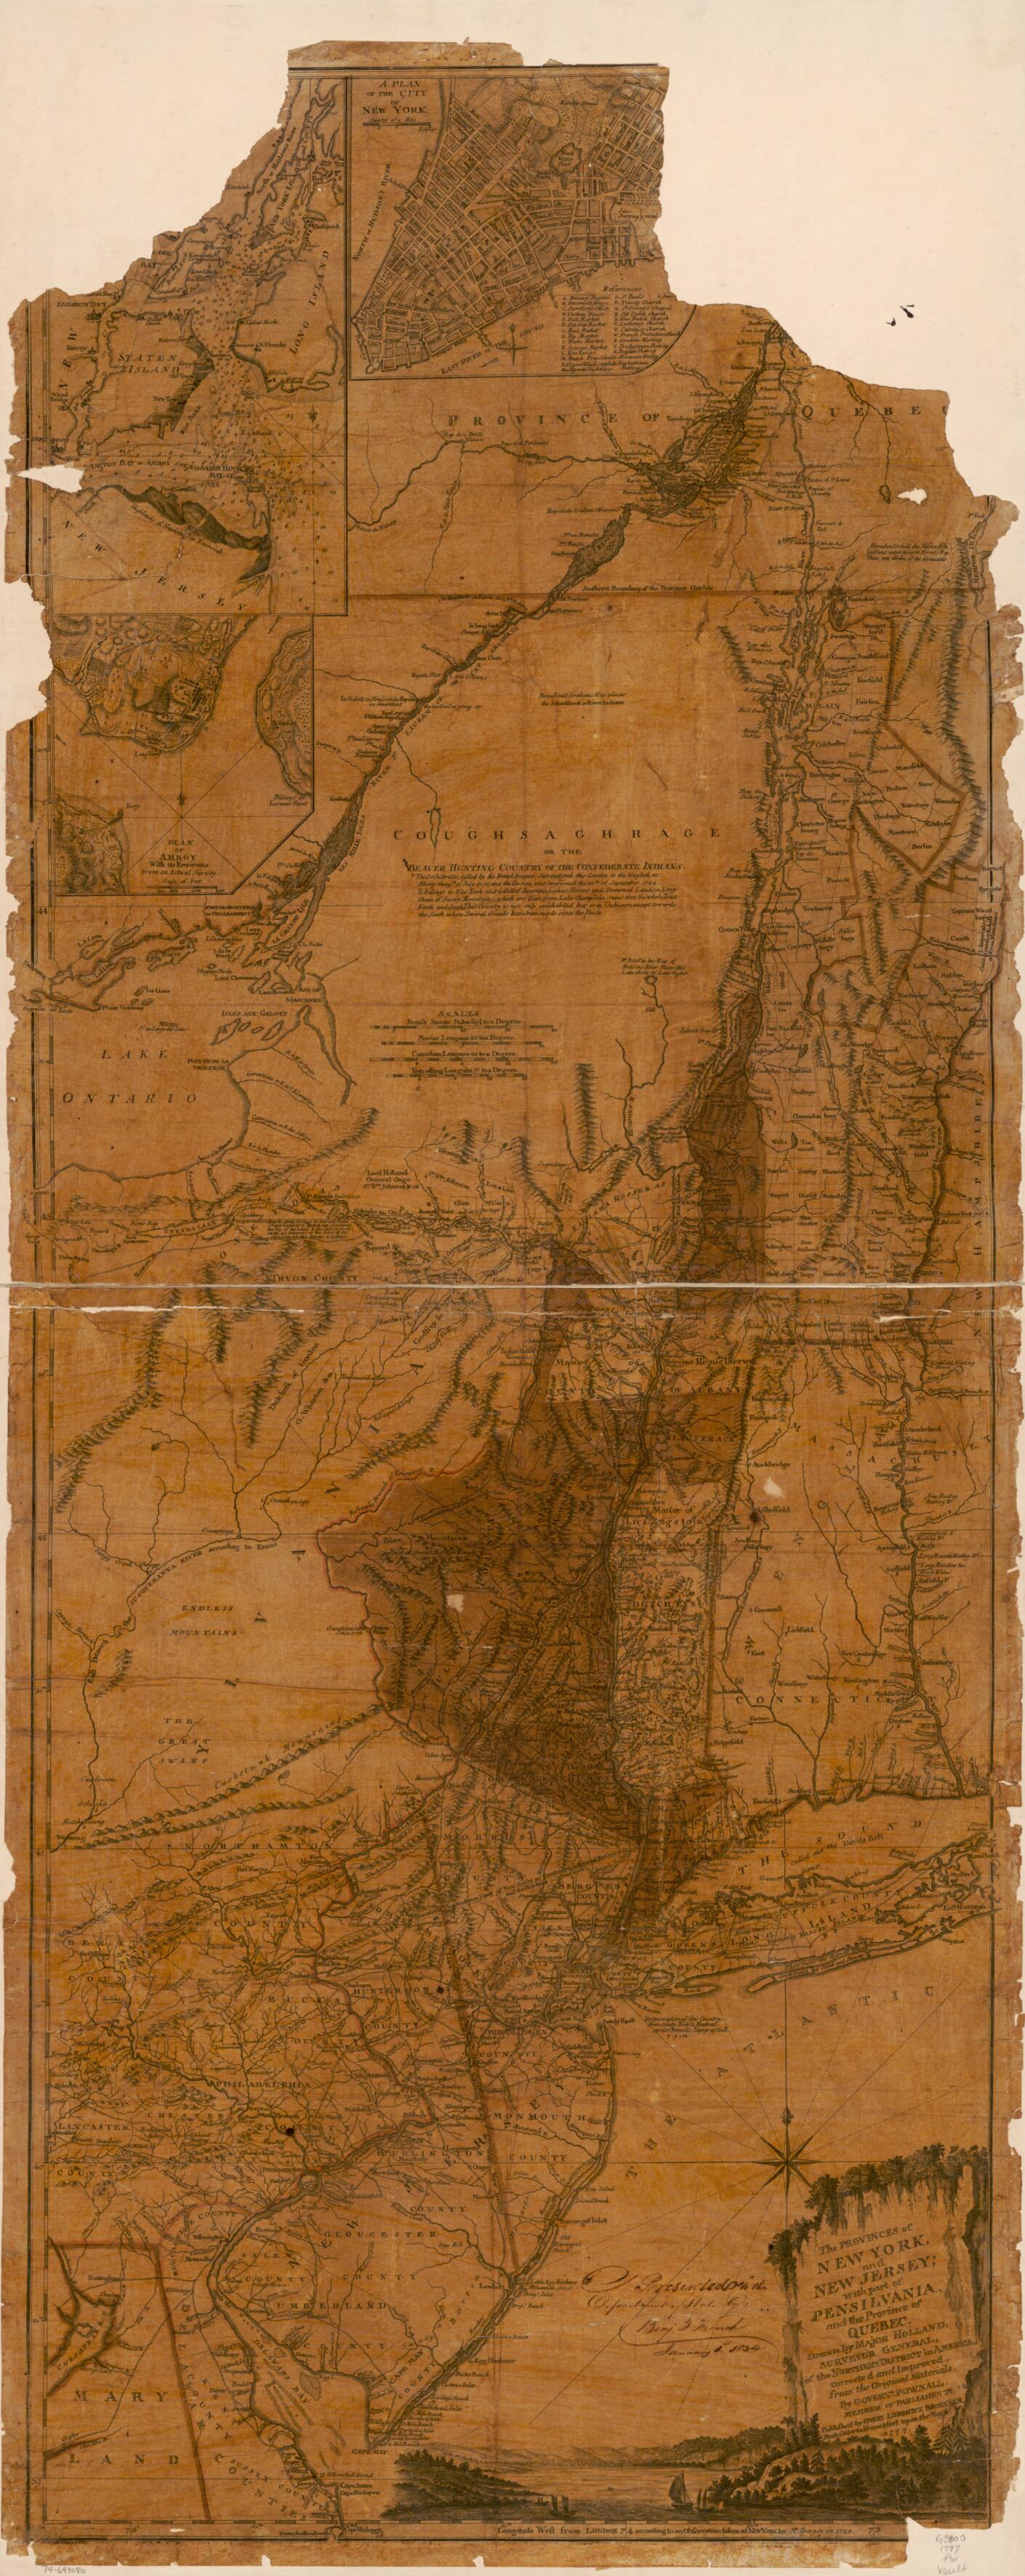 This old map of The Provinces of New York, and New Jersey; With Part of Pensilvania and the Province of Quebec. Drawn by Major Holland, Surveyor General of the Northern District In America from 1777 was created by Harry Lodowick Broenner, Henry Contger, 